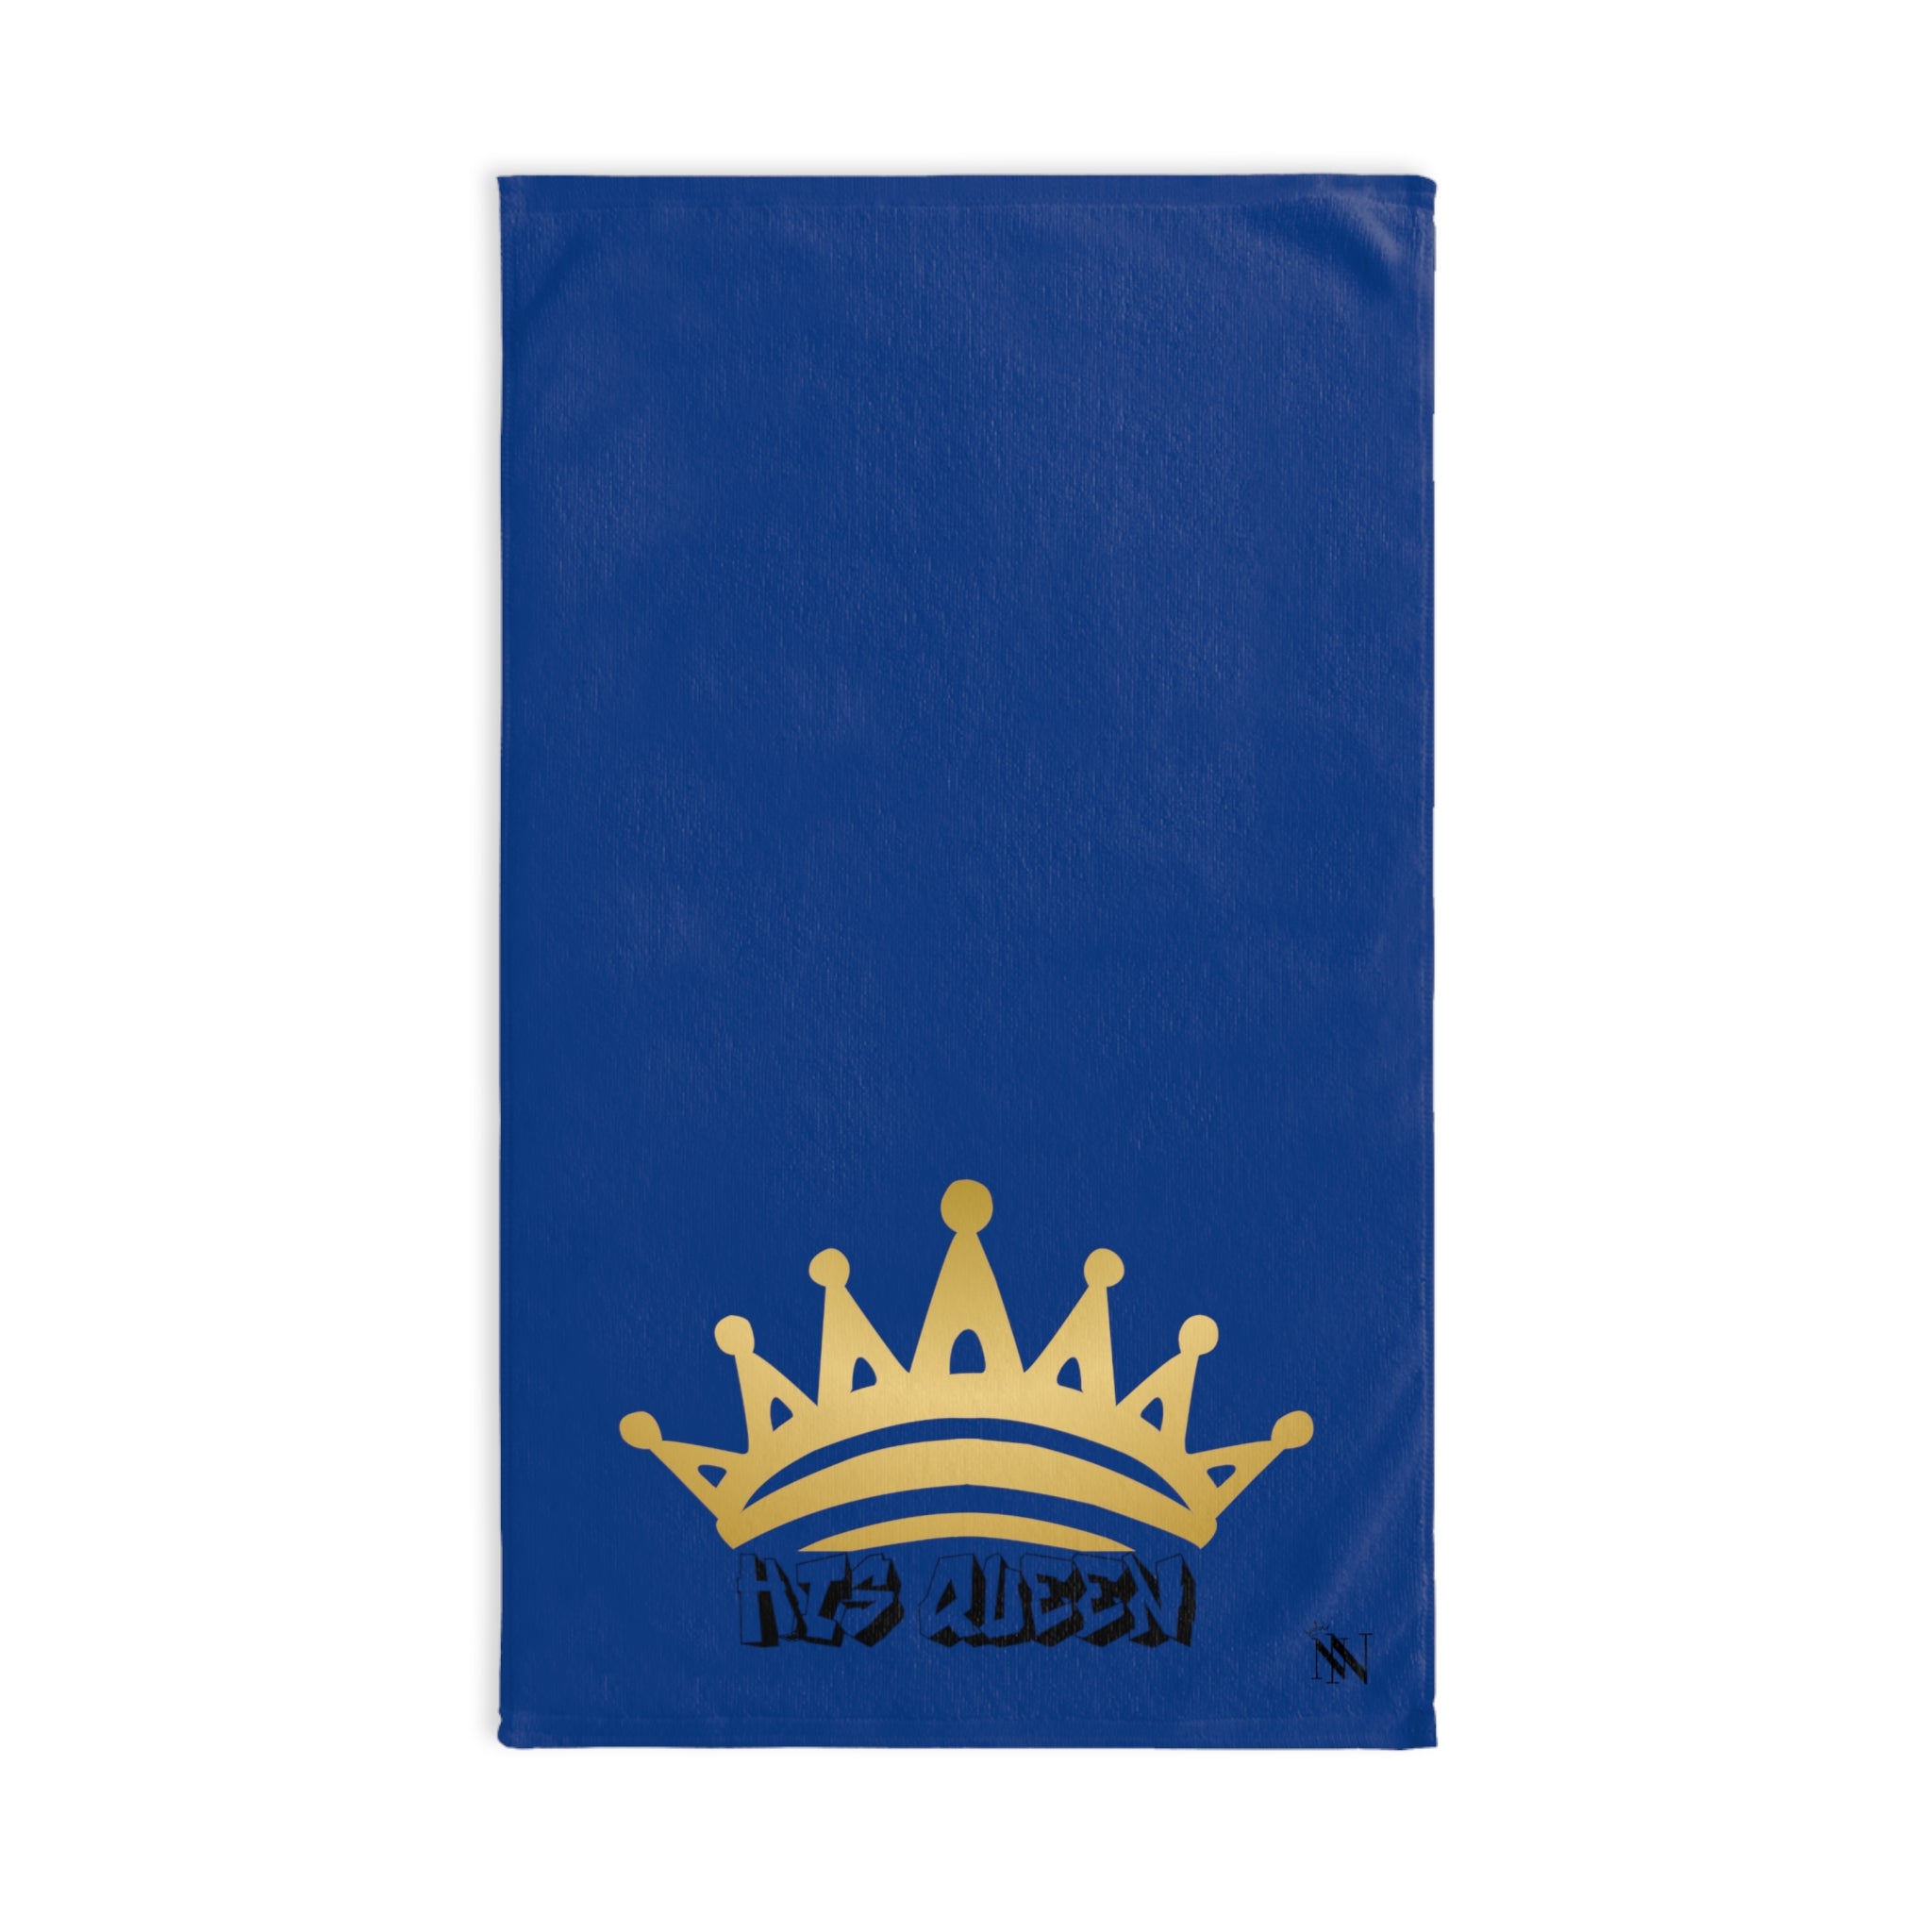 Gold His Queen Blue | Gifts for Boyfriend, Funny Towel Romantic Gift for Wedding Couple Fiance First Year Anniversary Valentines, Party Gag Gifts, Joke Humor Cloth for Husband Men BF NECTAR NAPKINS